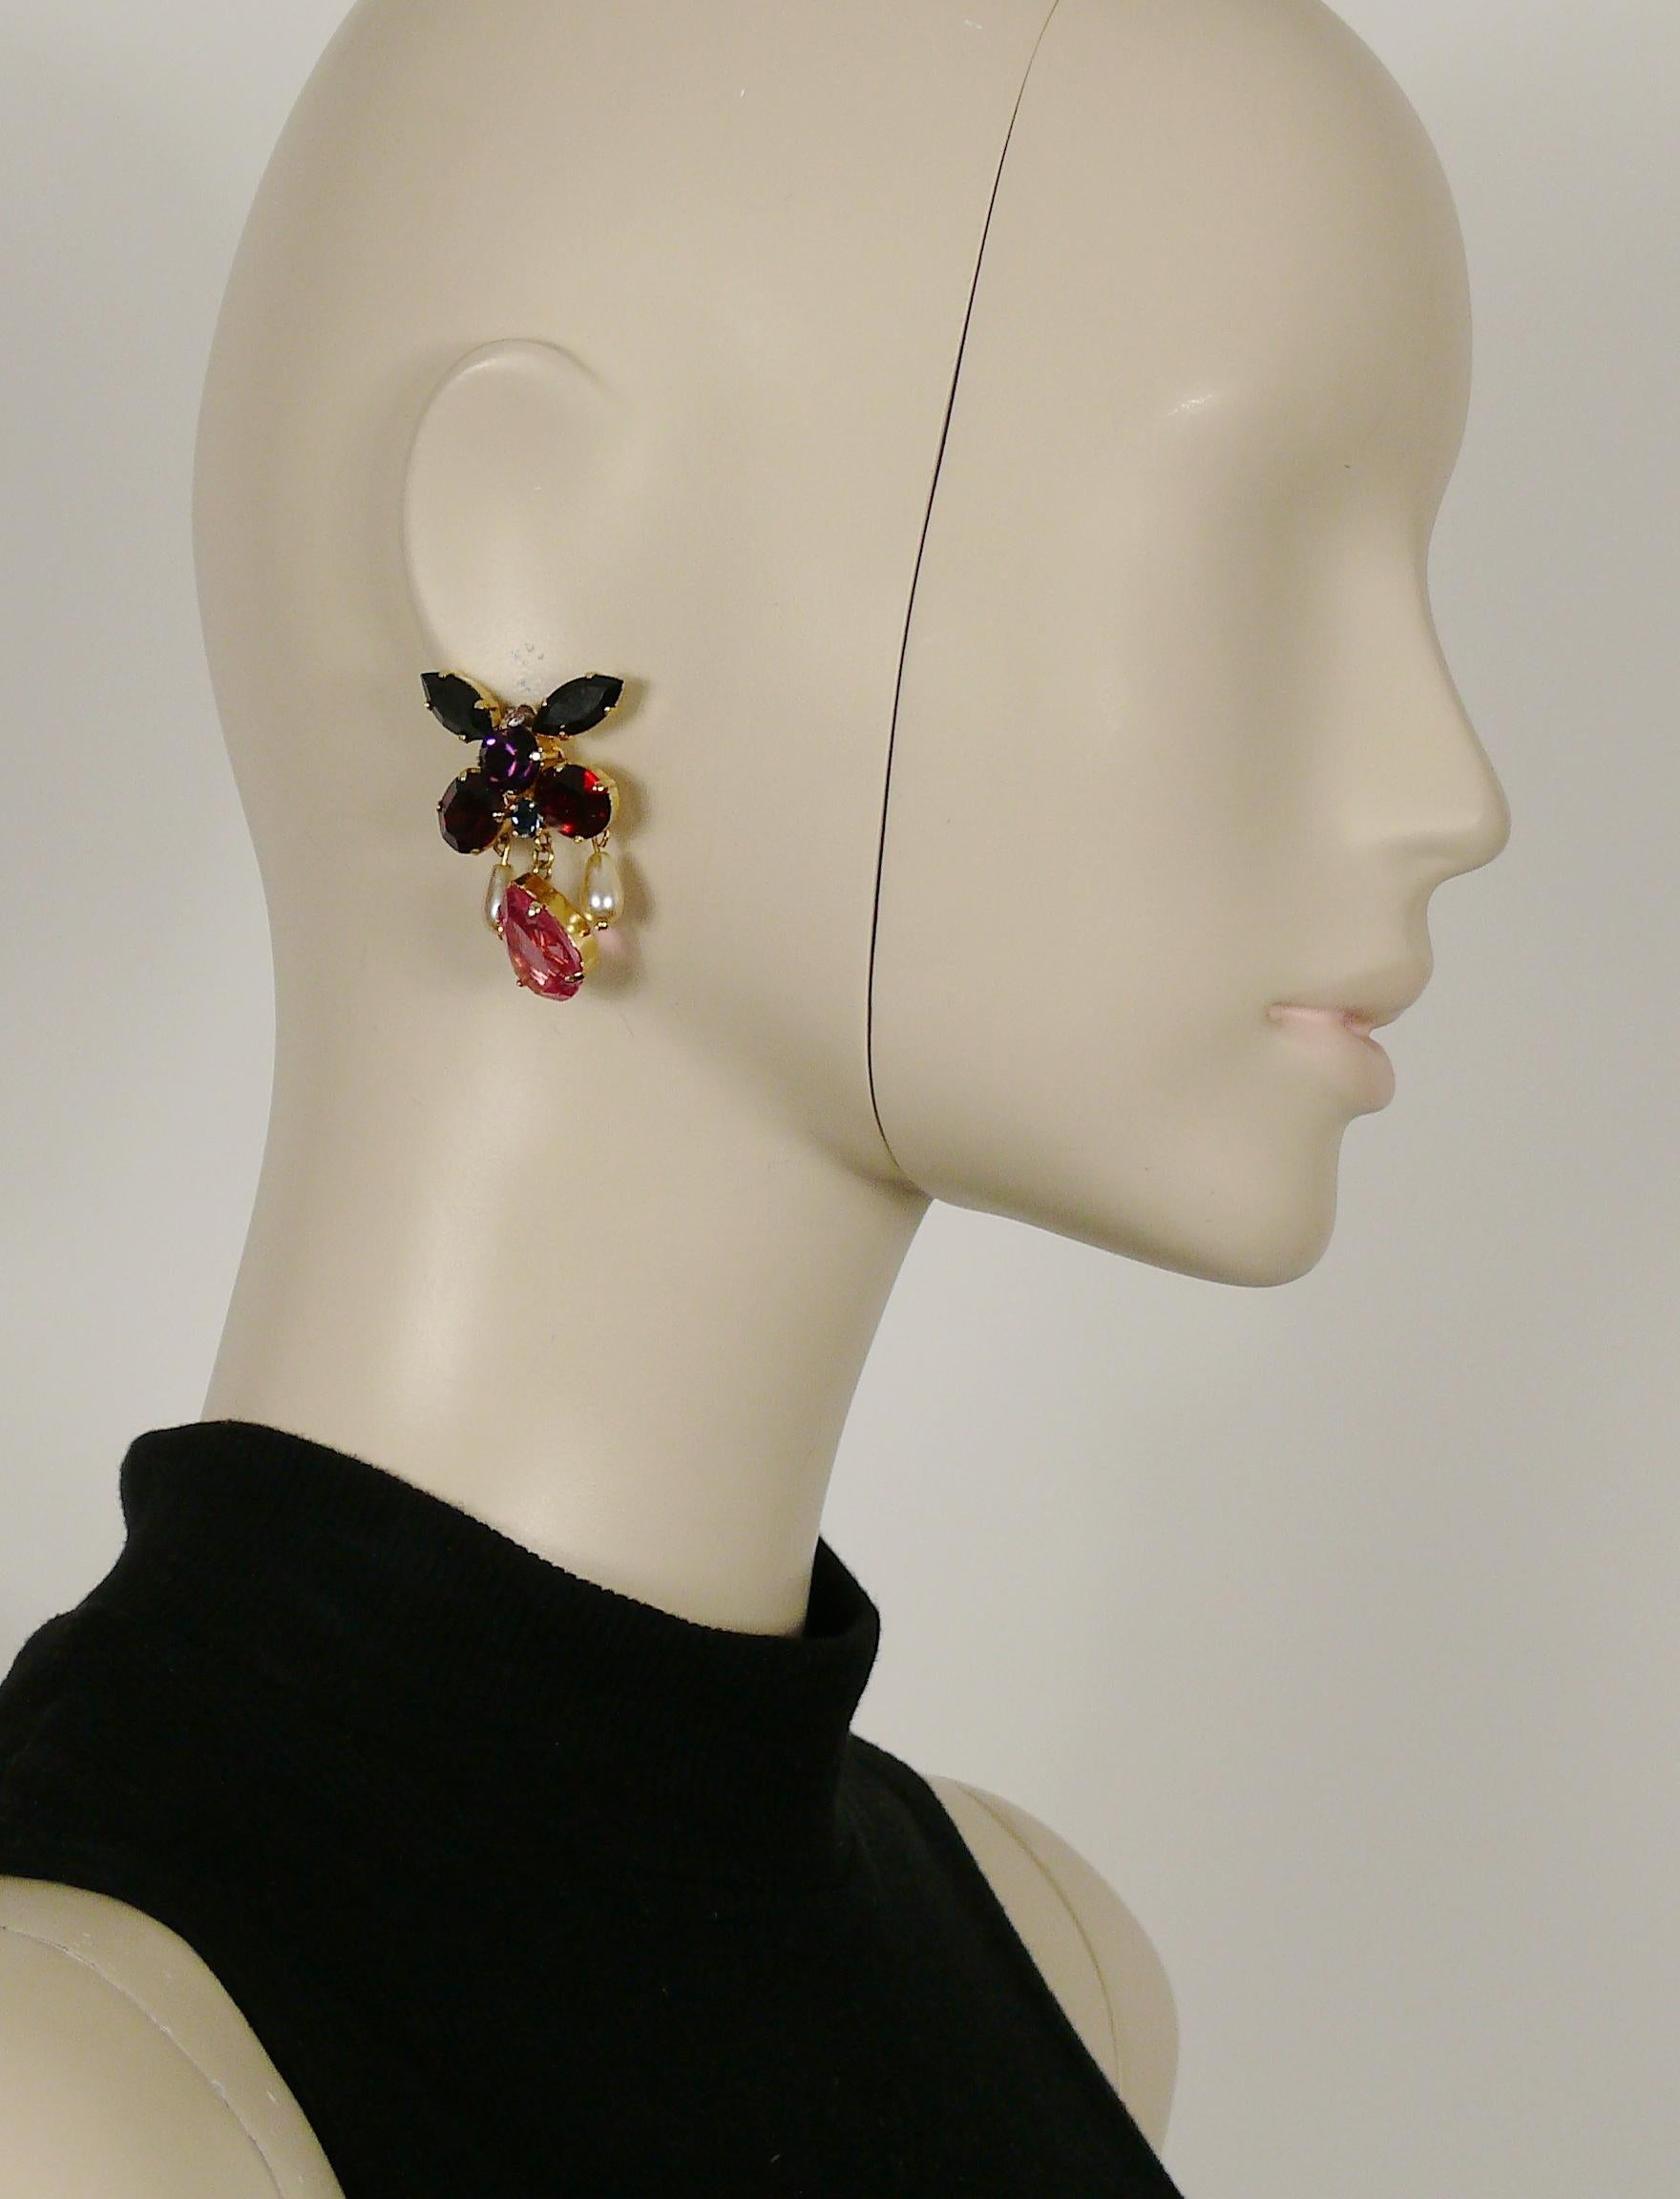 CHRISTIAN LACROIX vintage butterfly shaped clip-on earrings embellished with multicolored crystals and faux pearl drops.

Marked CHRISTIAN LACROIX CL Made in France.

Indicative measurements : max. 4.2 cm x max. 3 cm (1.65 inches x 1.18